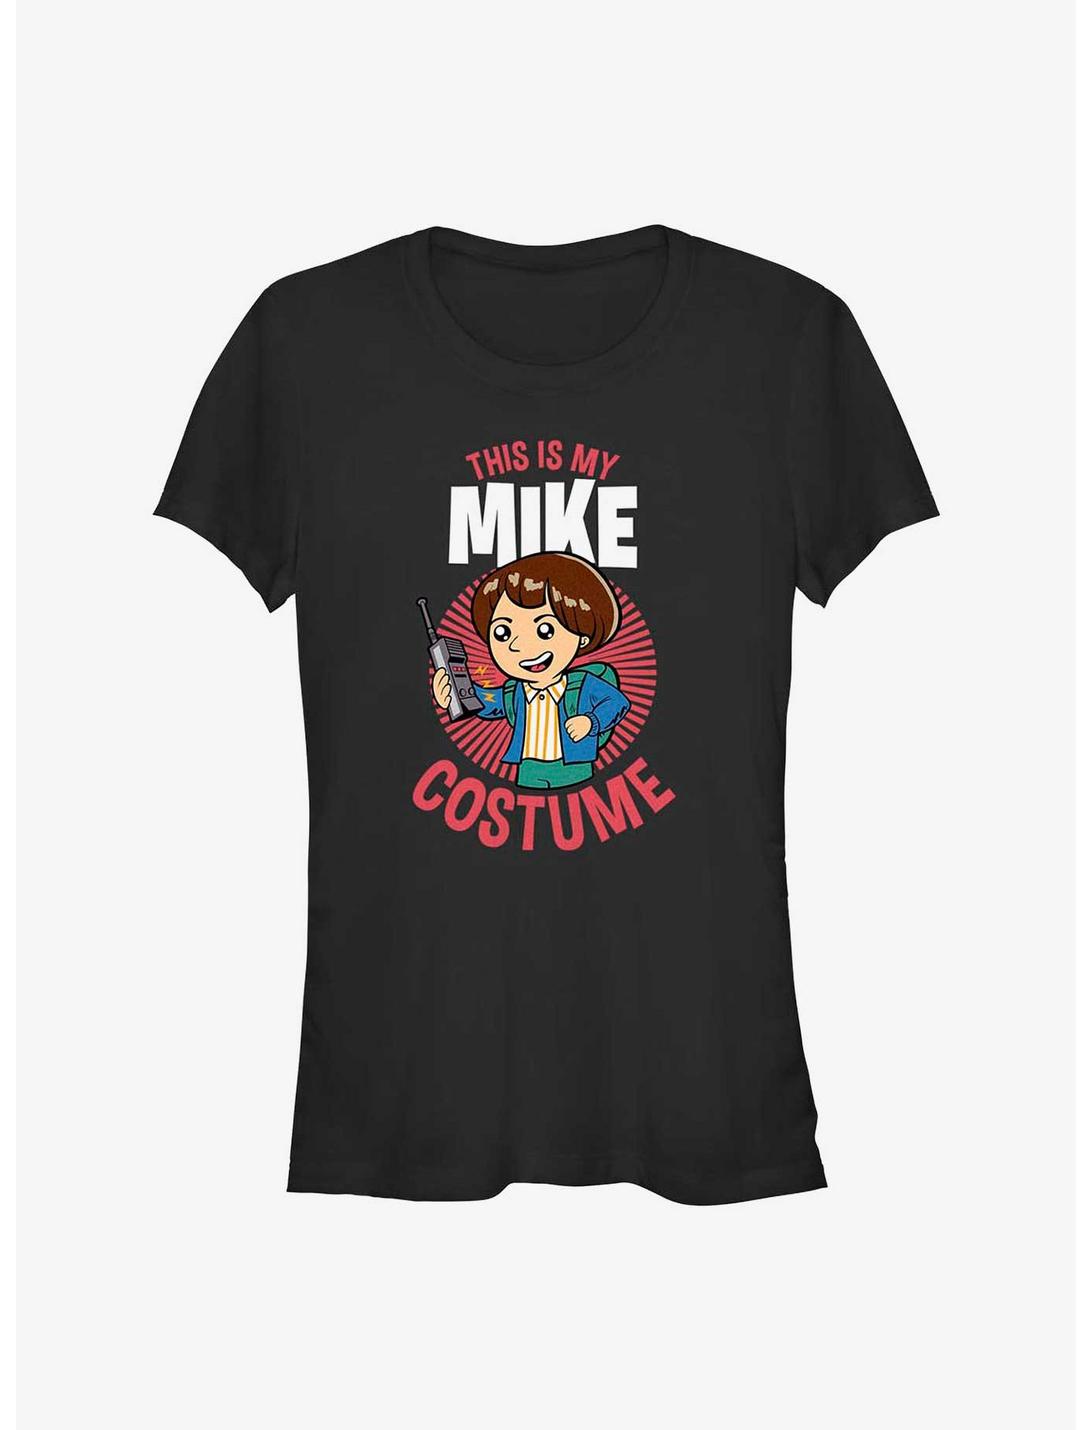 Stranger Things This Is My Mike Costume Girls T-Shirt, BLACK, hi-res